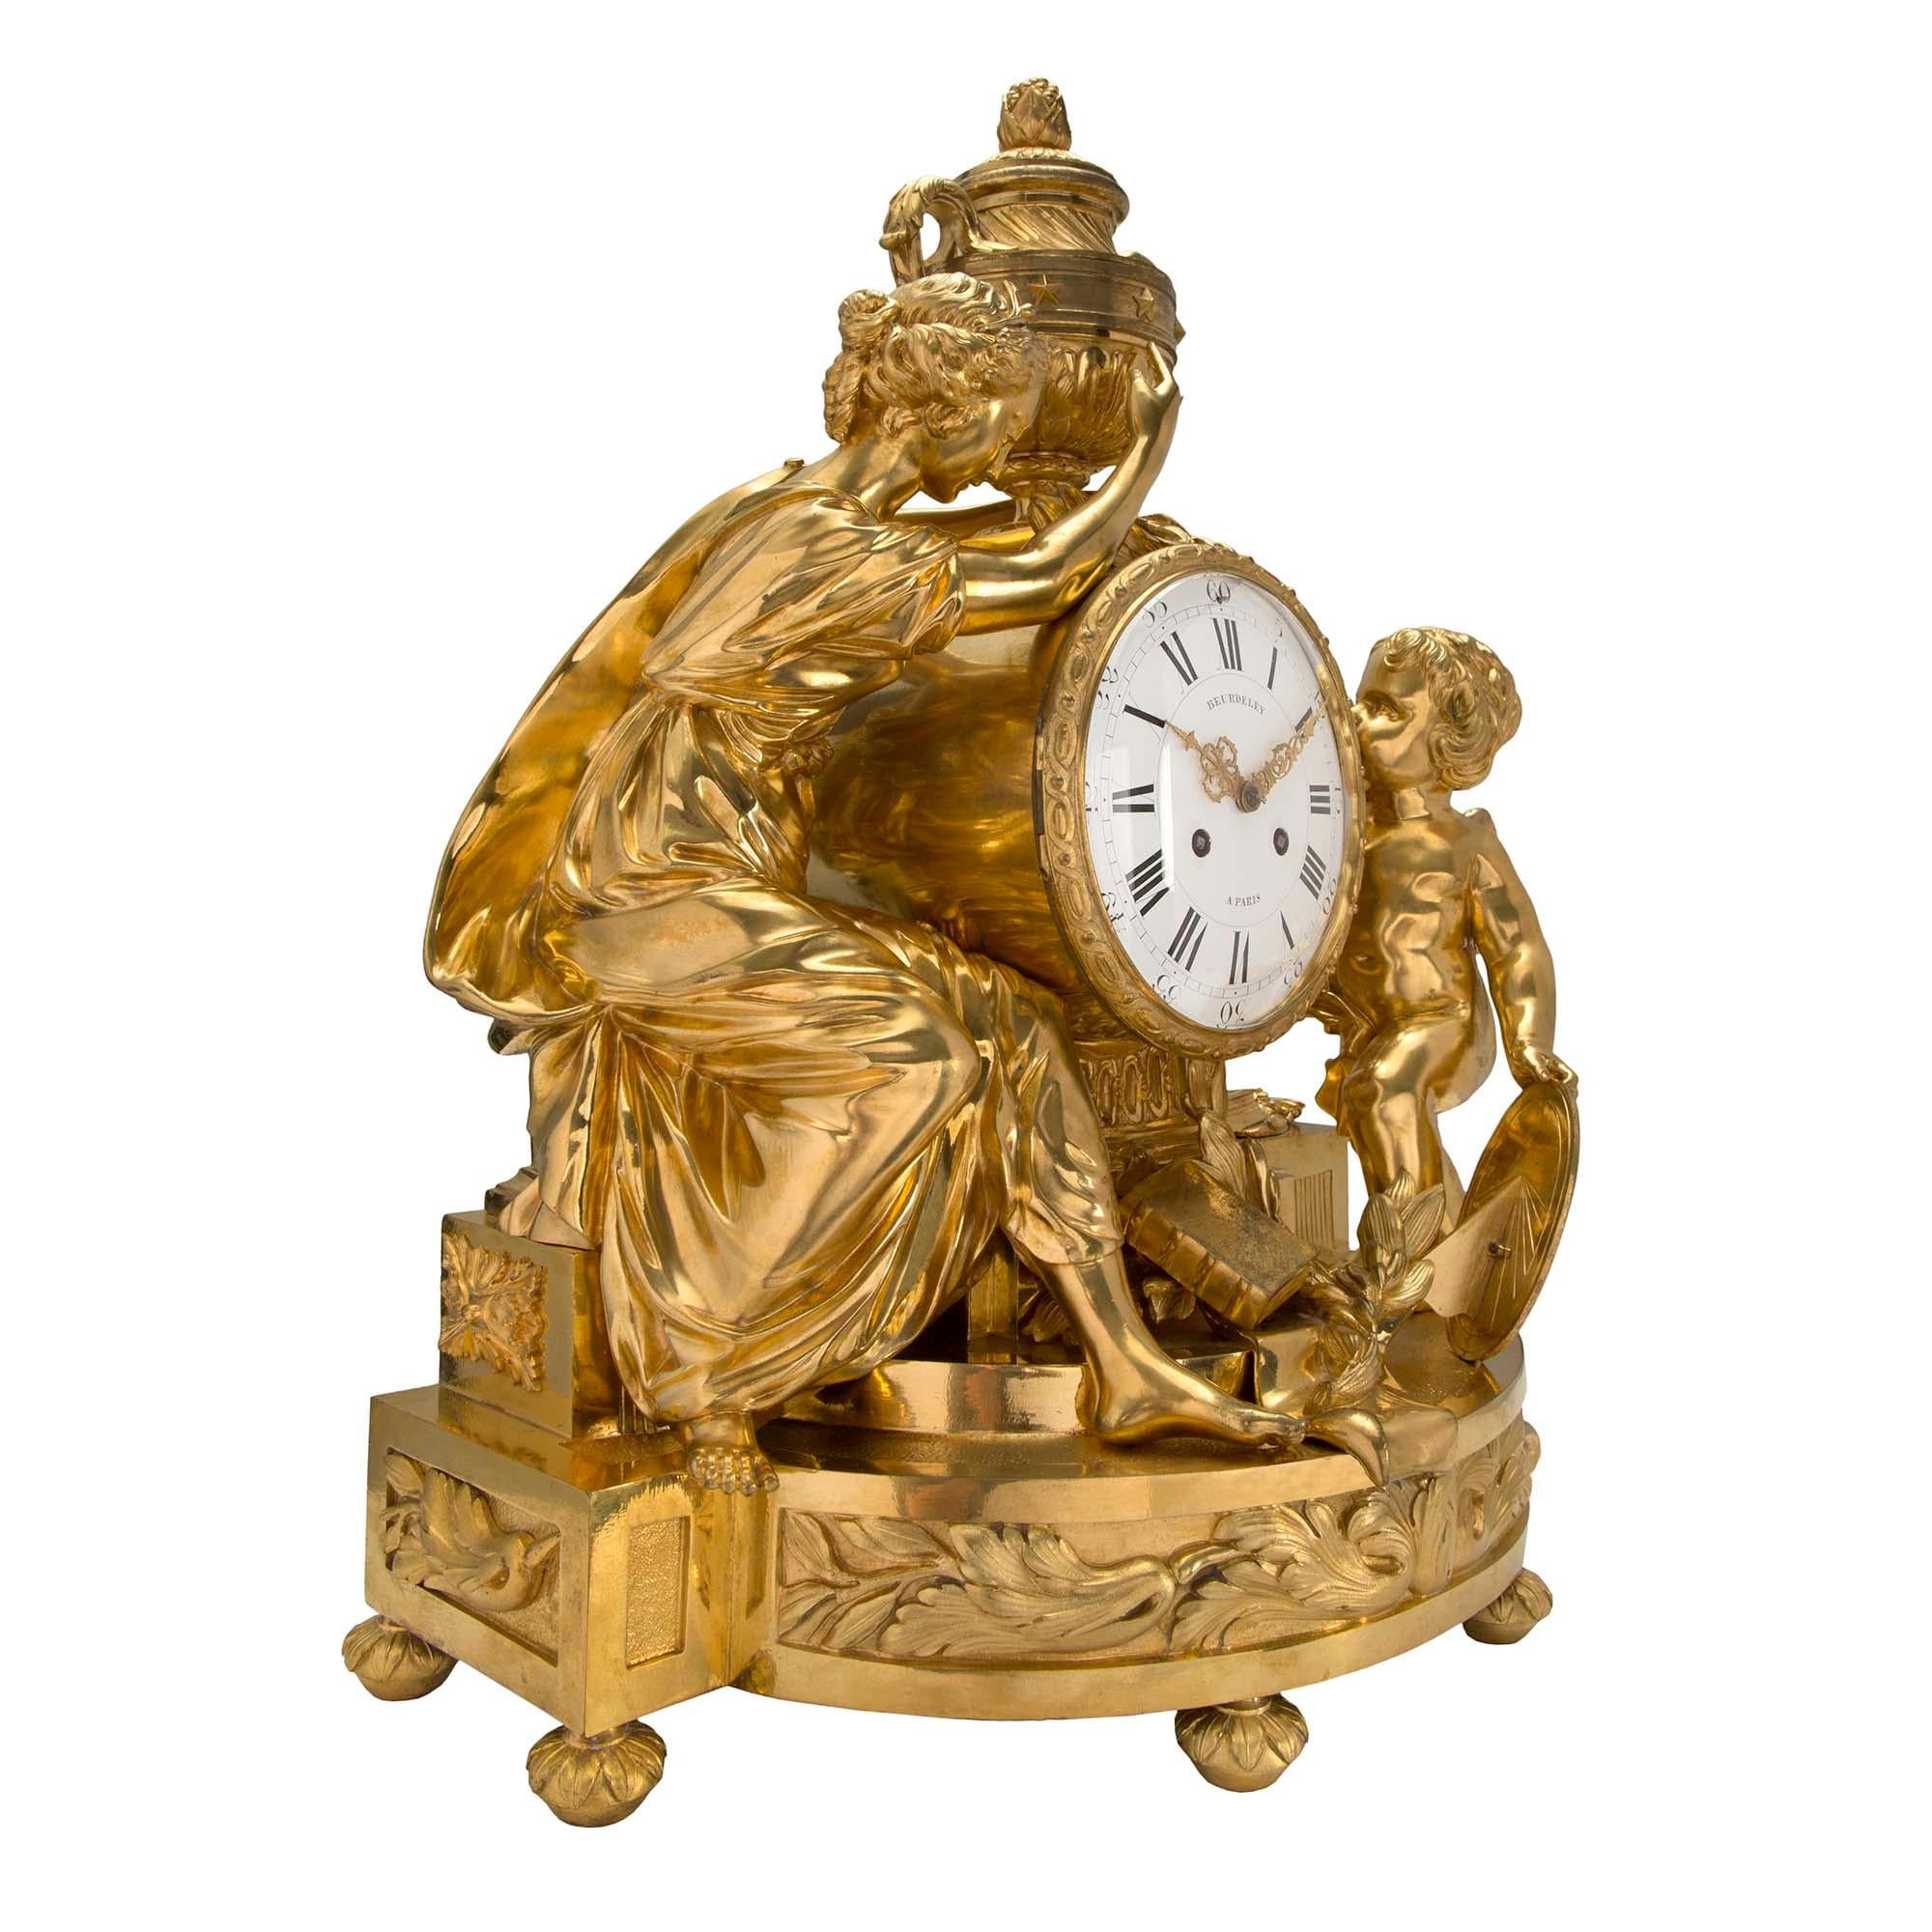 A most spectacular and sensational quality French mid 19th century Louis XVI st. clock in ormolu signed ‘BEURDELEY À PARIS’. The large scaled clock is raised by bun supports decorated by leaves below a double level platform with a front and side